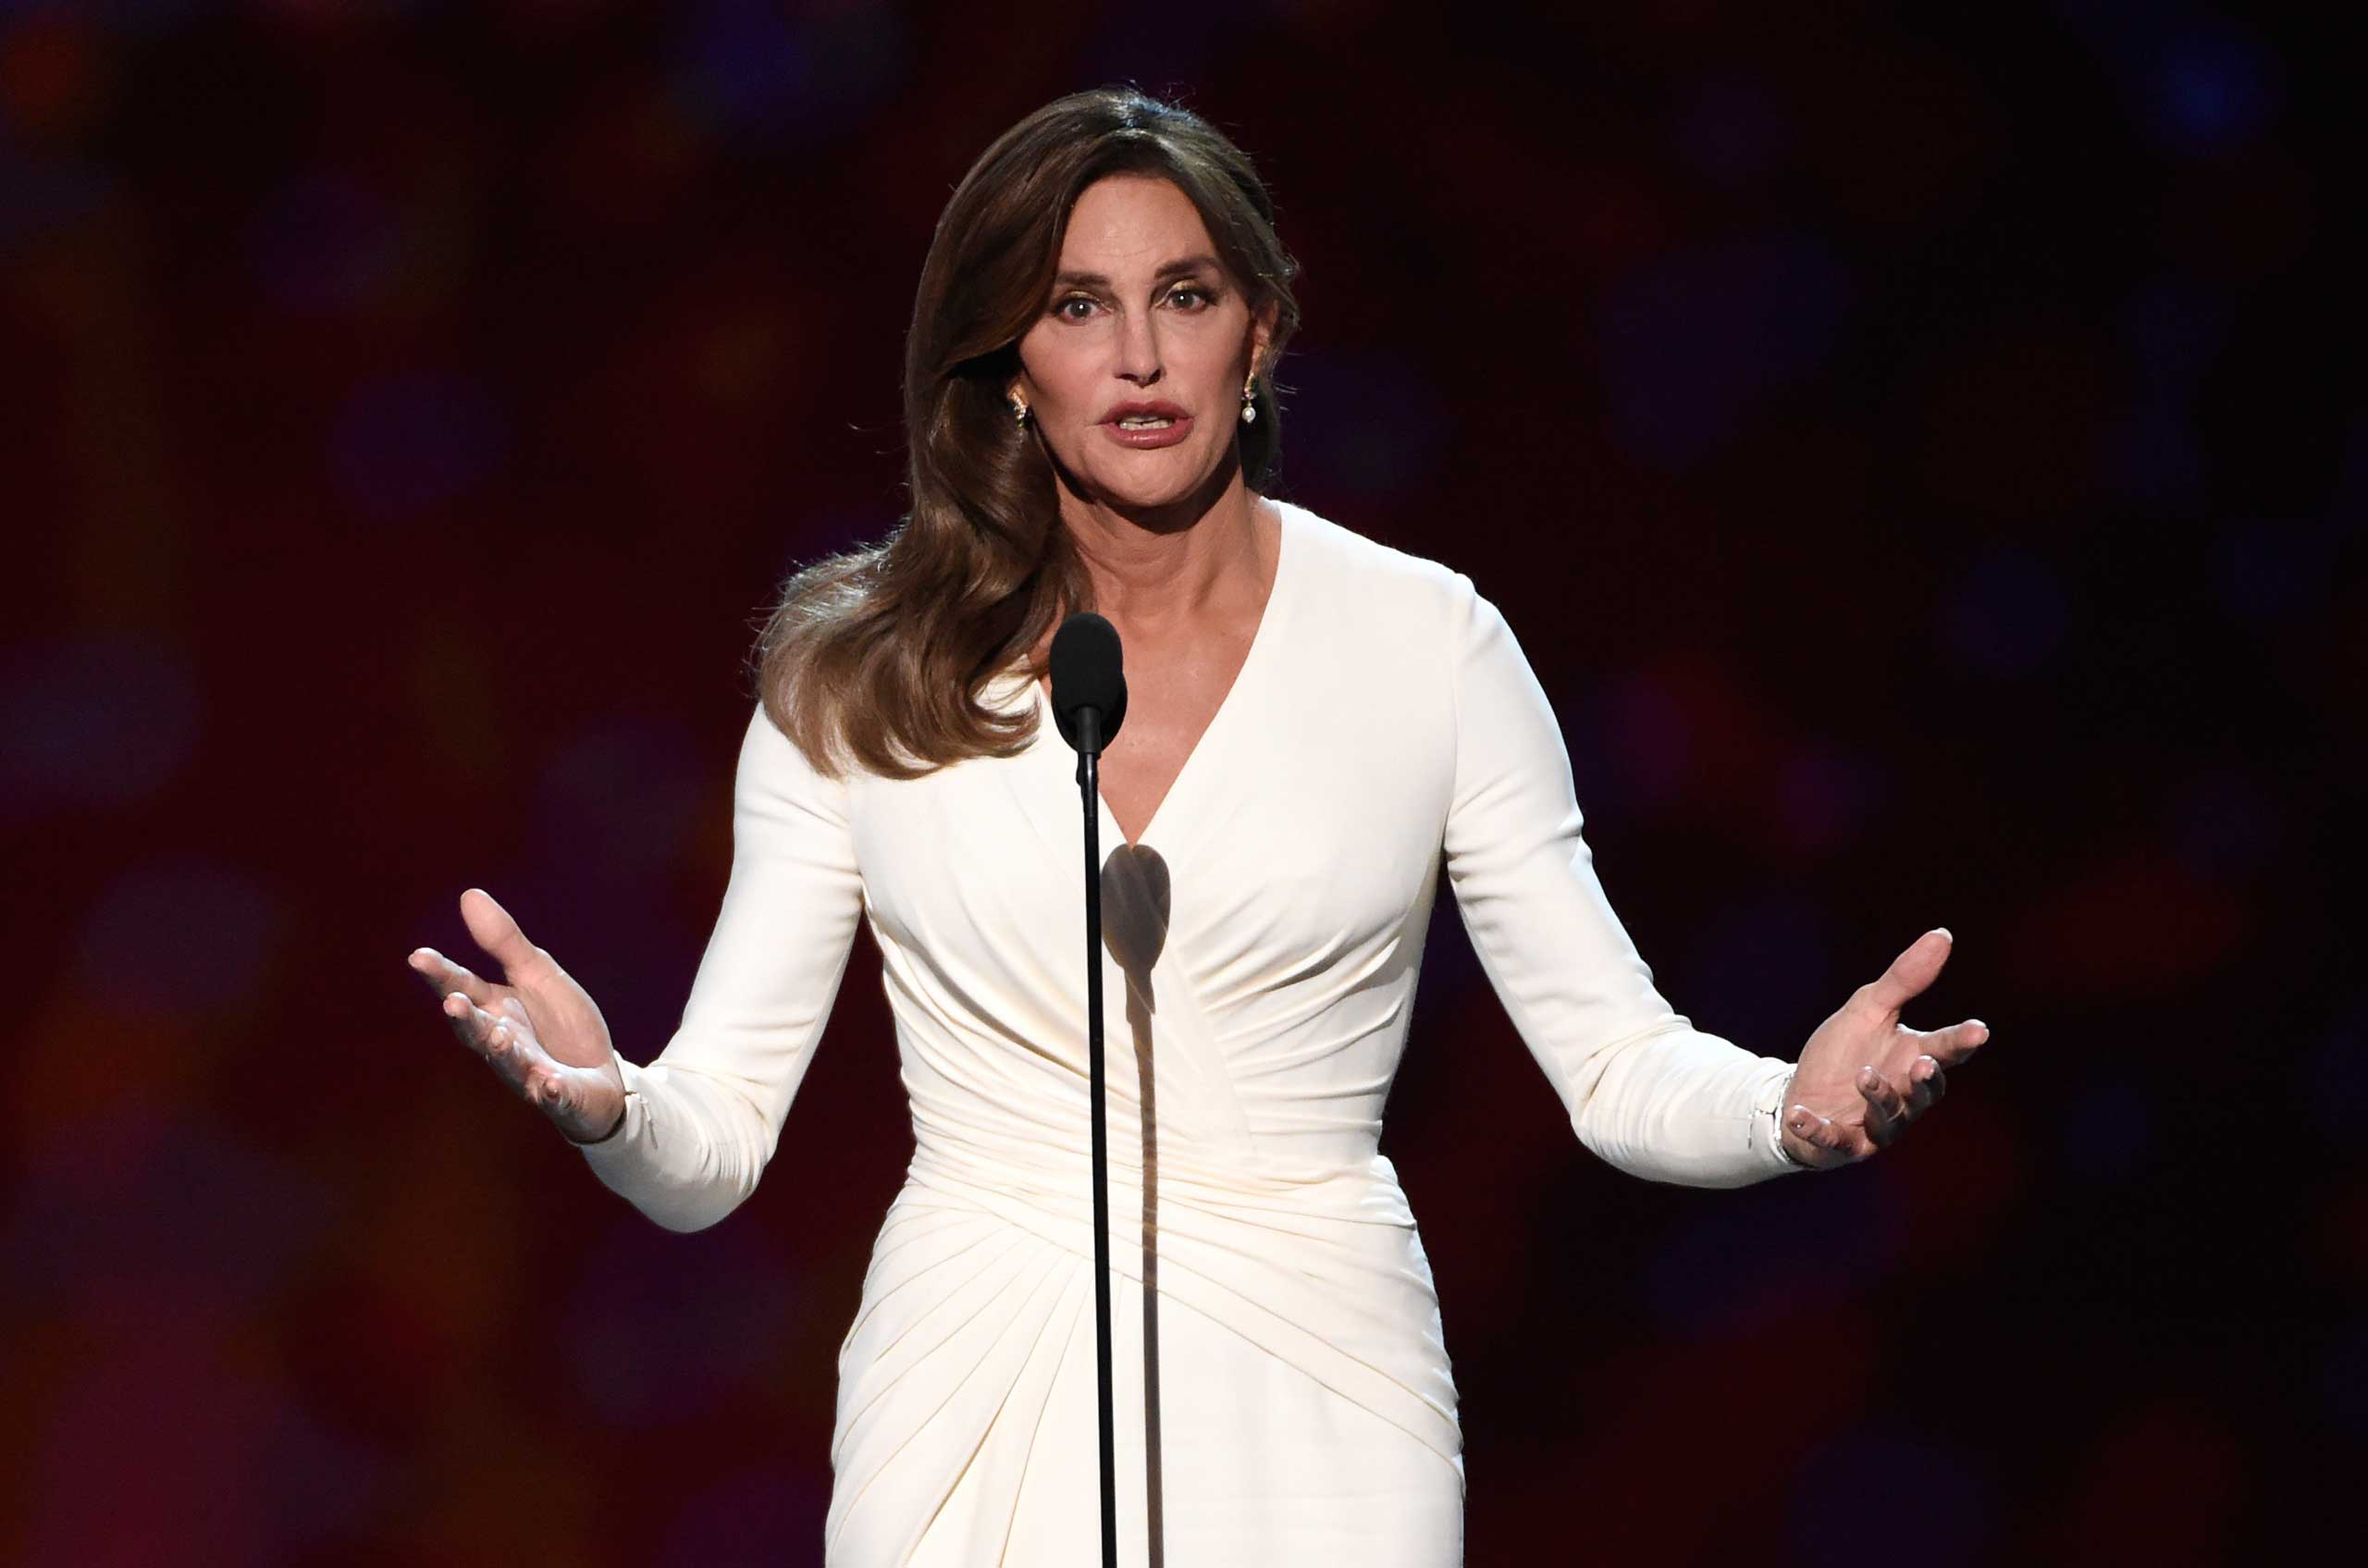 Caitlyn Jenner accepts the Arthur Ashe award for courage at the ESPY Awards at the Microsoft Theater in Los Angeles, July 15, 2015 (Chris Pizzello—Invision/AP)